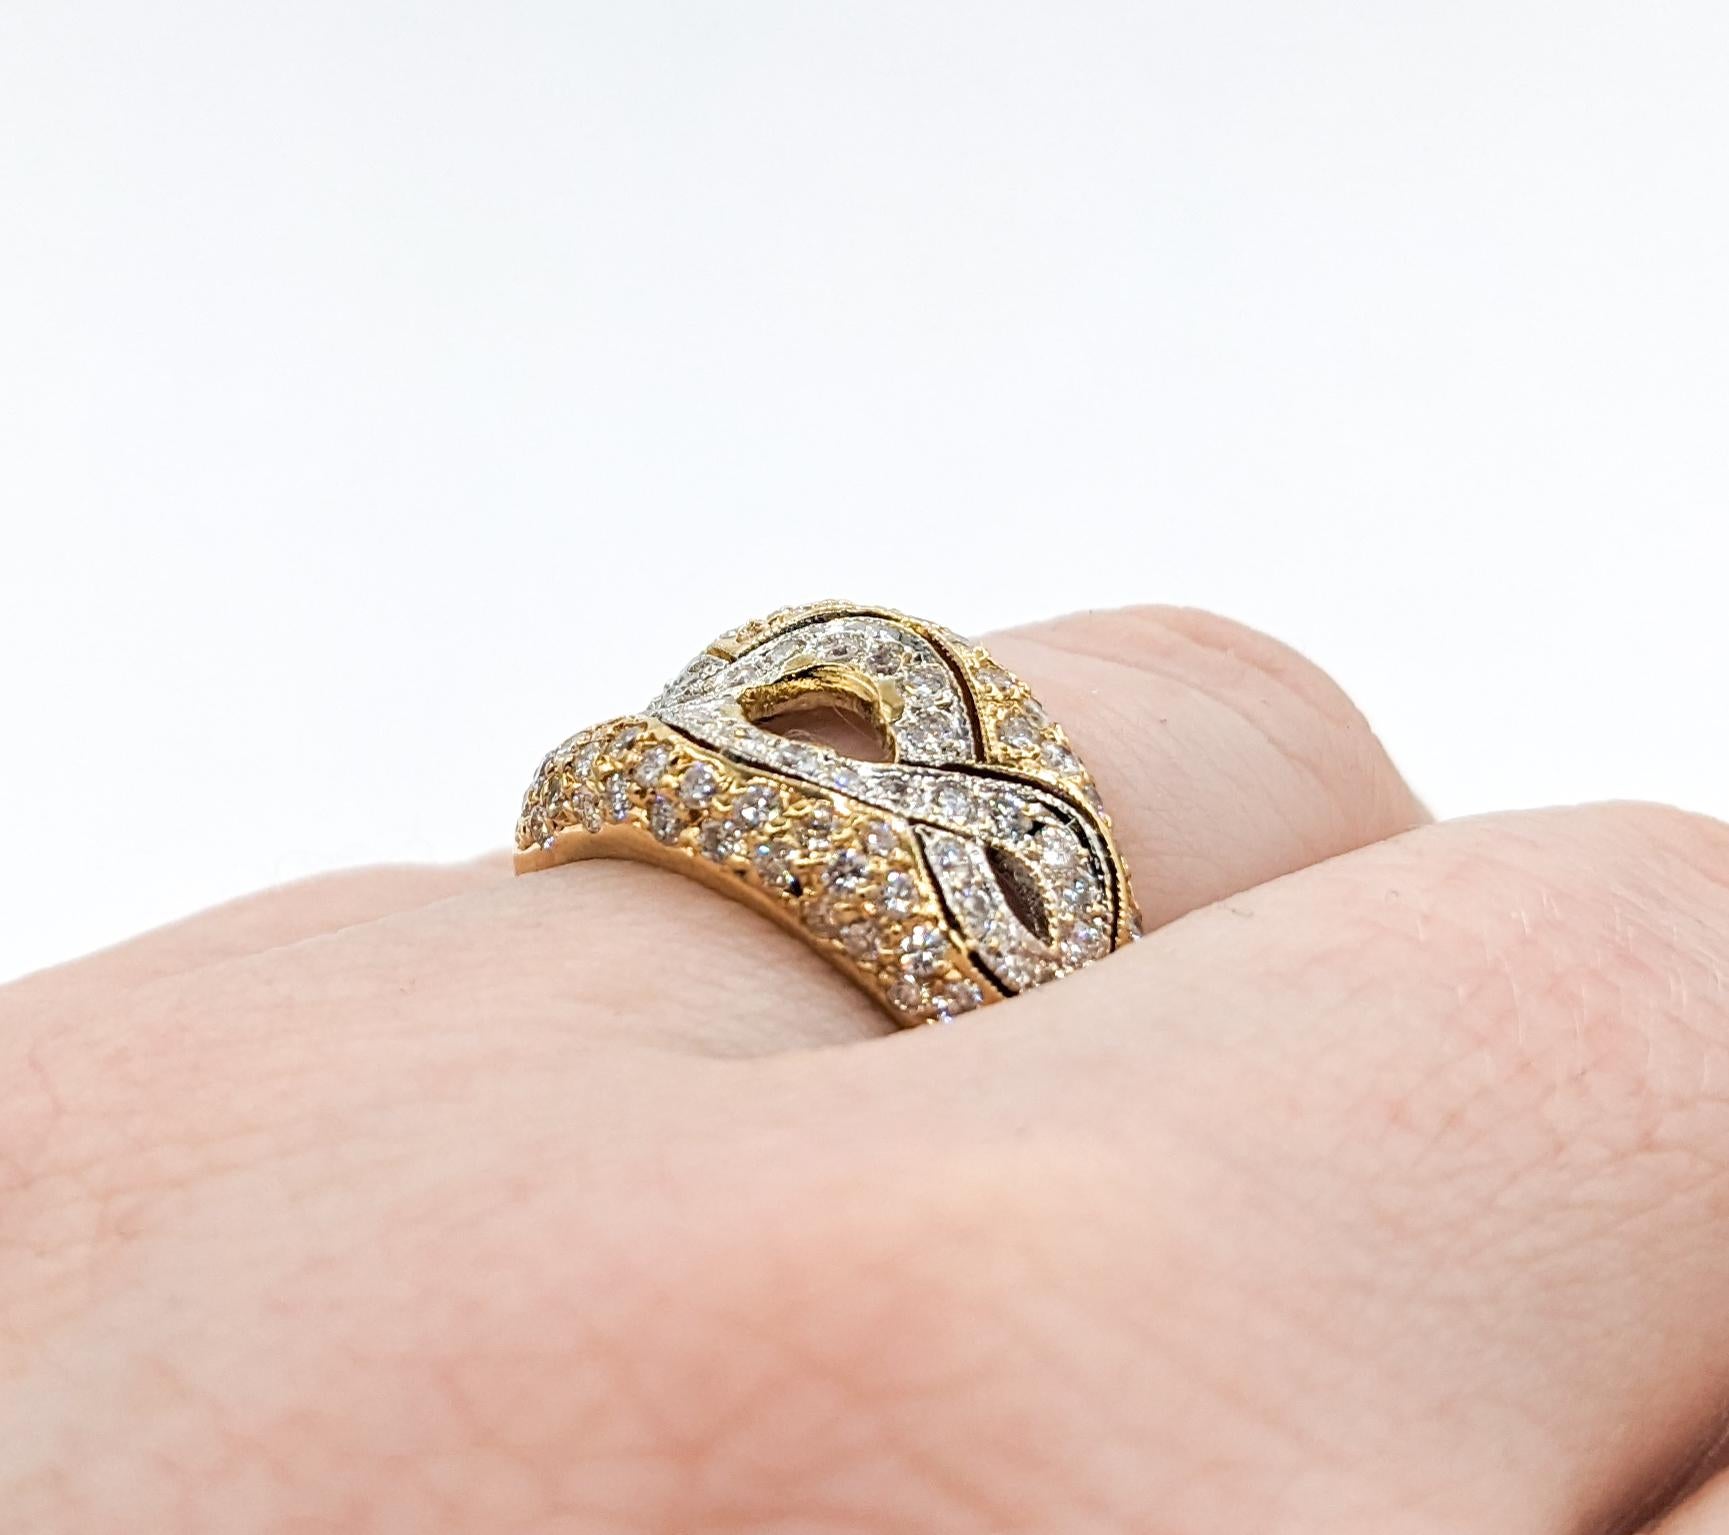 1ctw Diamond Ring In Two-Tone Gold For Sale 1